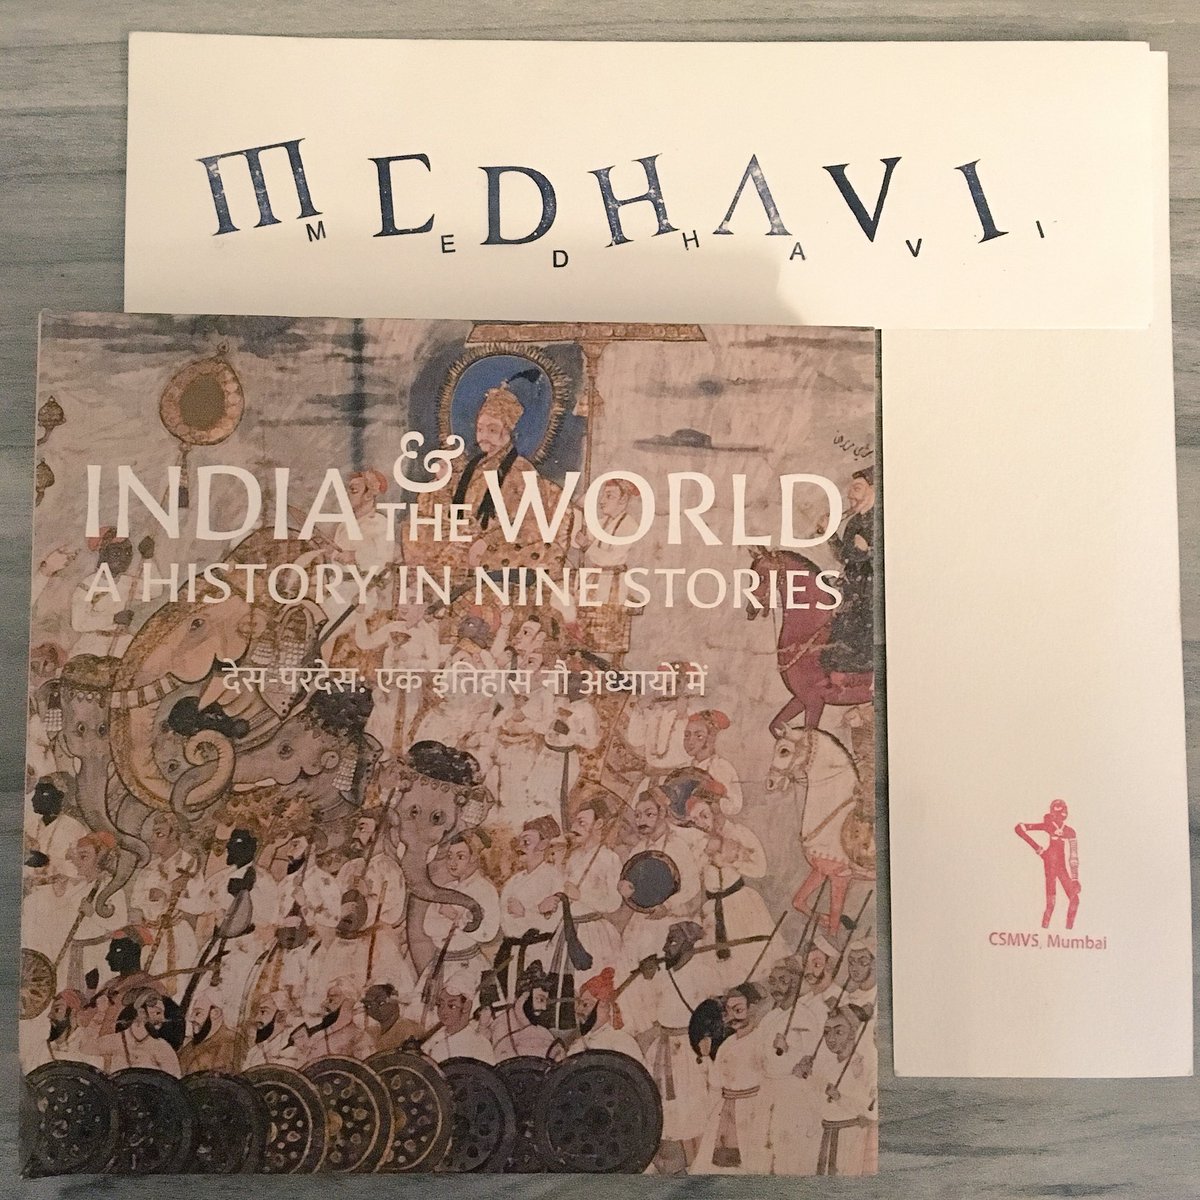 india-and-the-world-exhibition